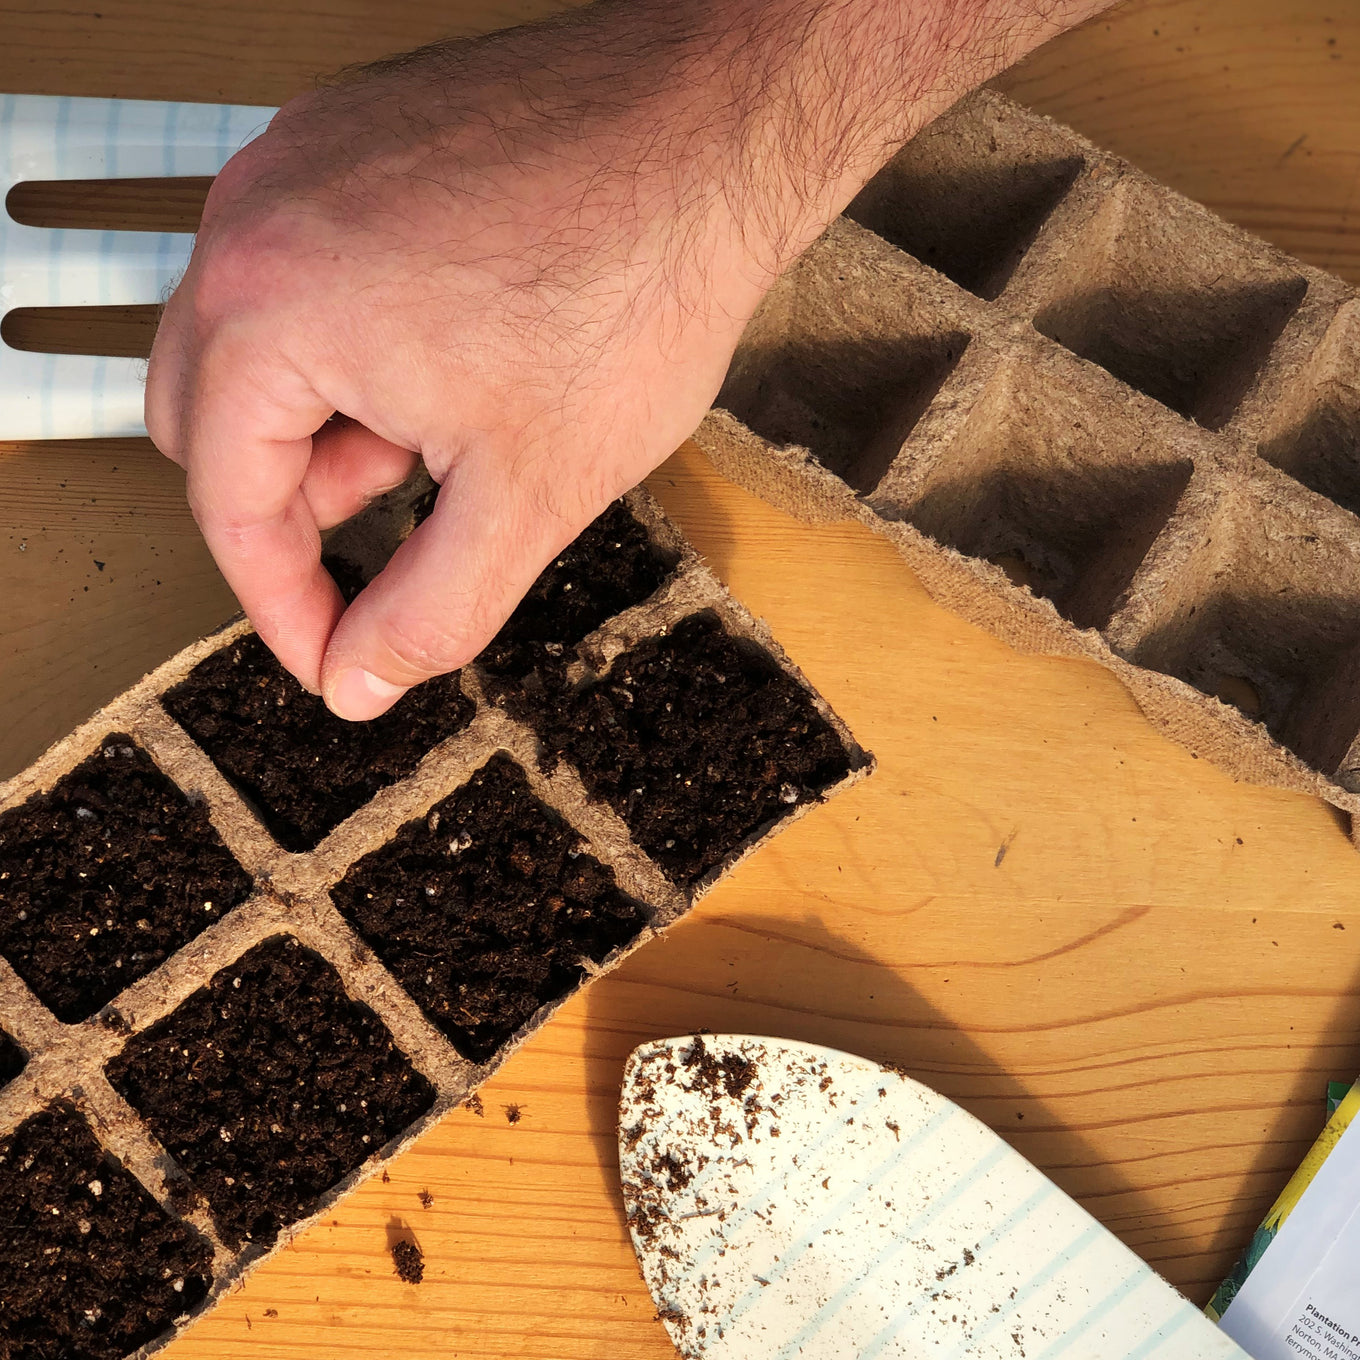 Start Organic Sumter Cucumber seeds in biodegradable peat strip trays or paper trays for easy transplanting and to prevent root shock.